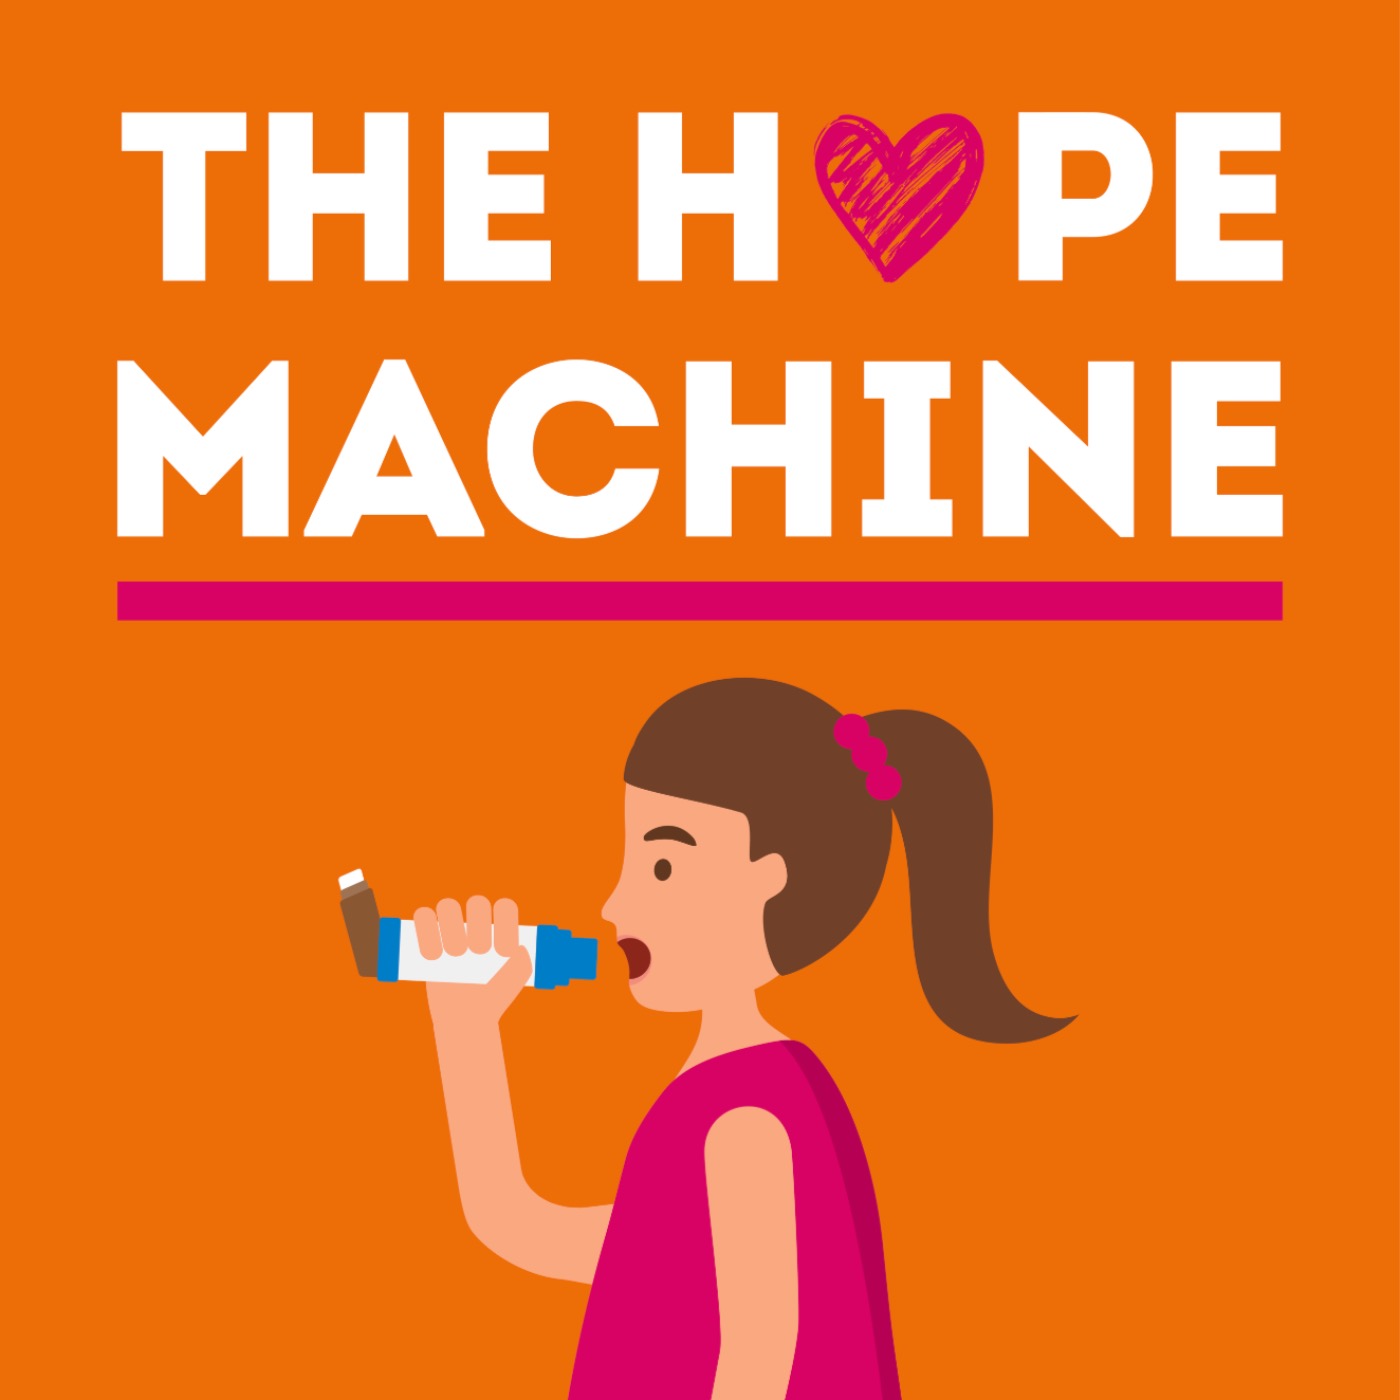 Why don't kids take their inhalers? | The Hope Machine | January 2022